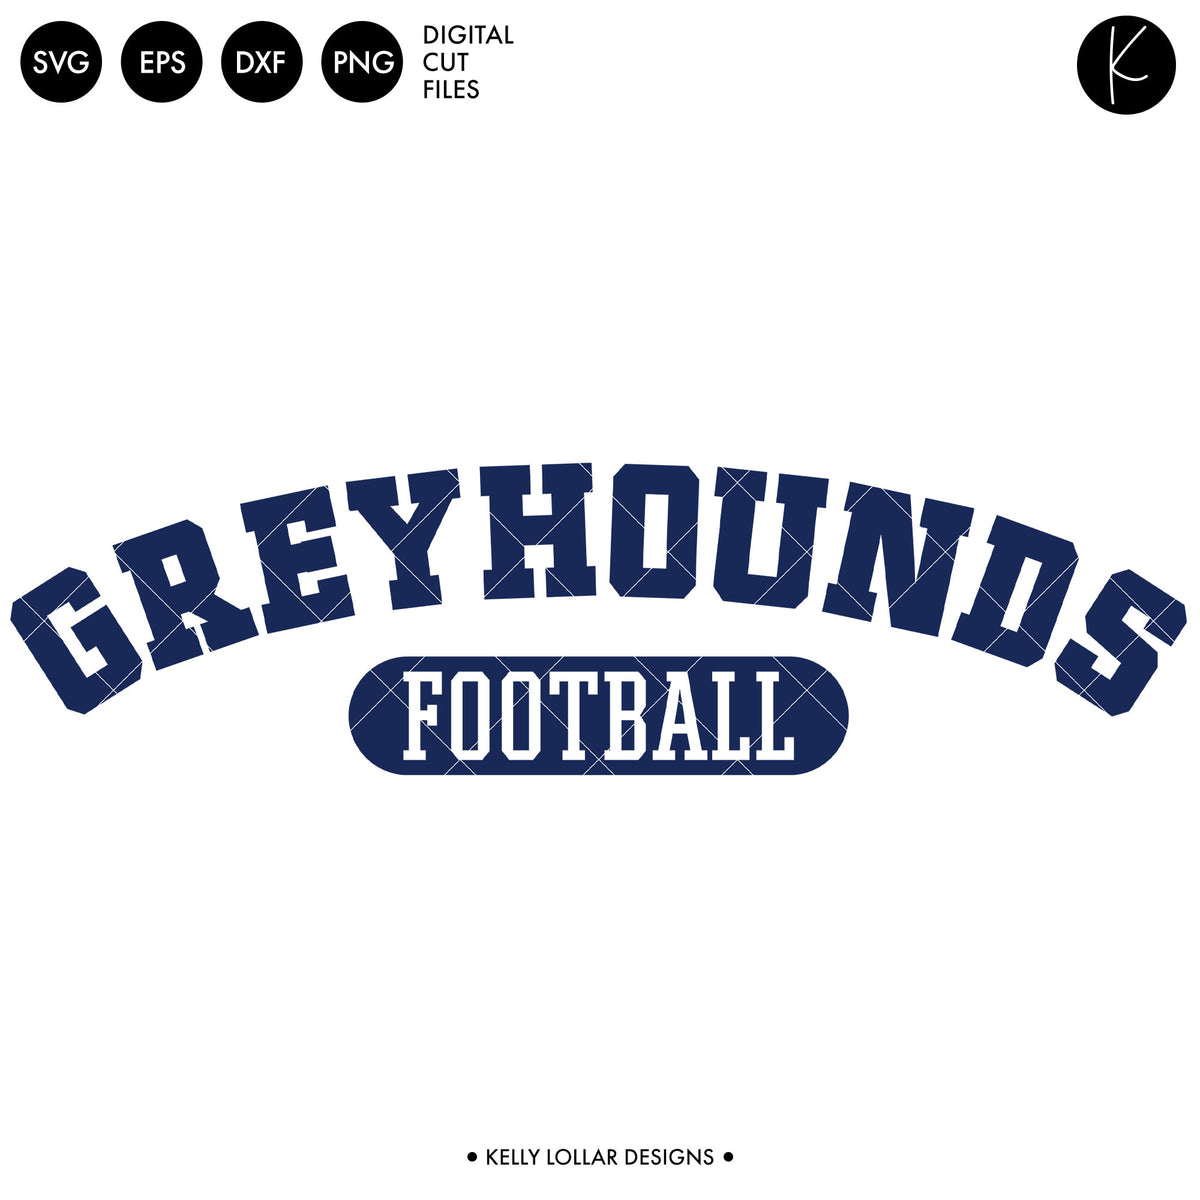 Greyhounds Soccer and Football Bundle | SVG DXF EPS PNG Cut Files